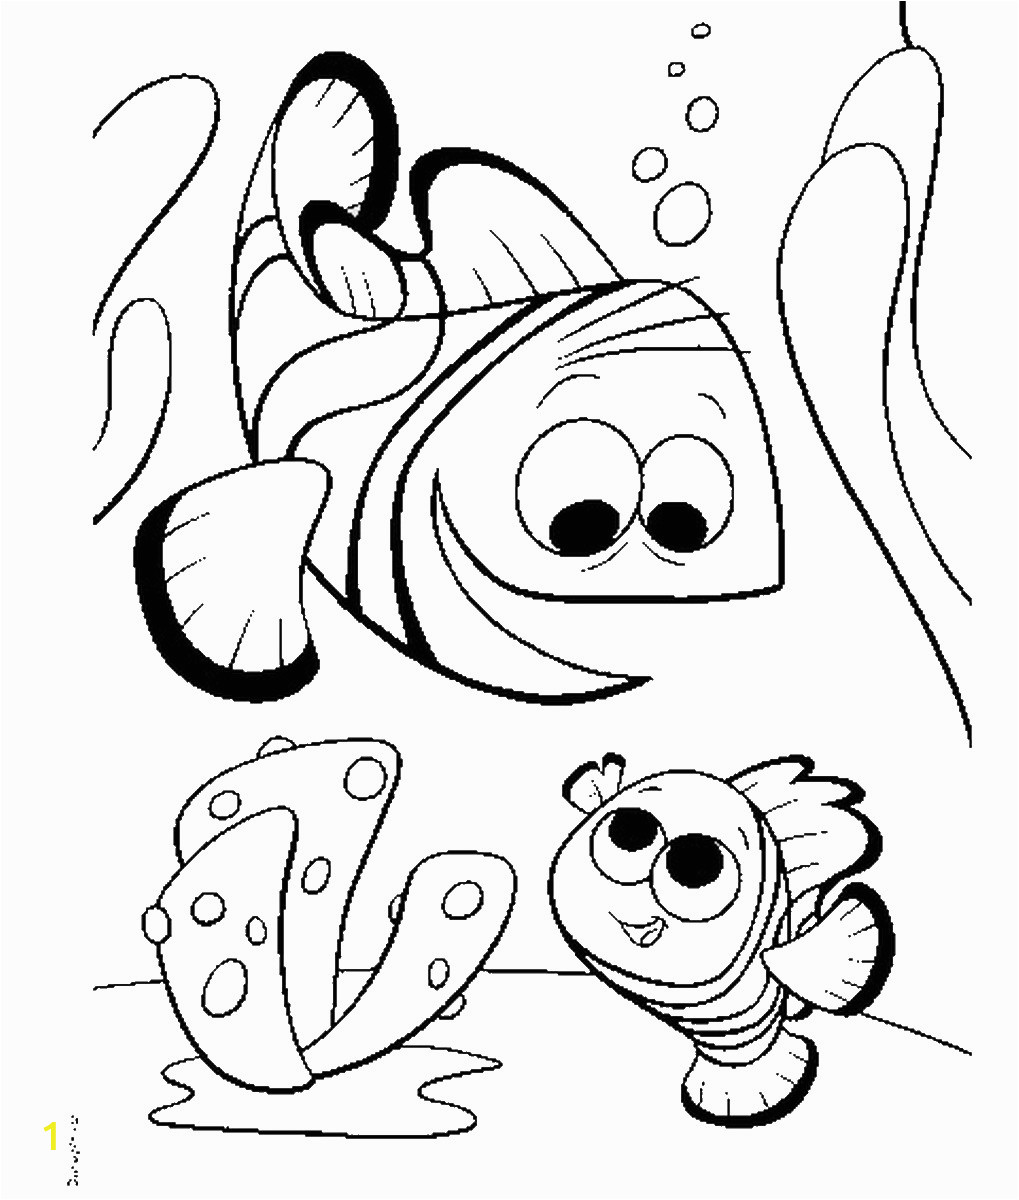 Free Printable Finding Nemo Coloring Pages Finding Nemo Coloring Pages